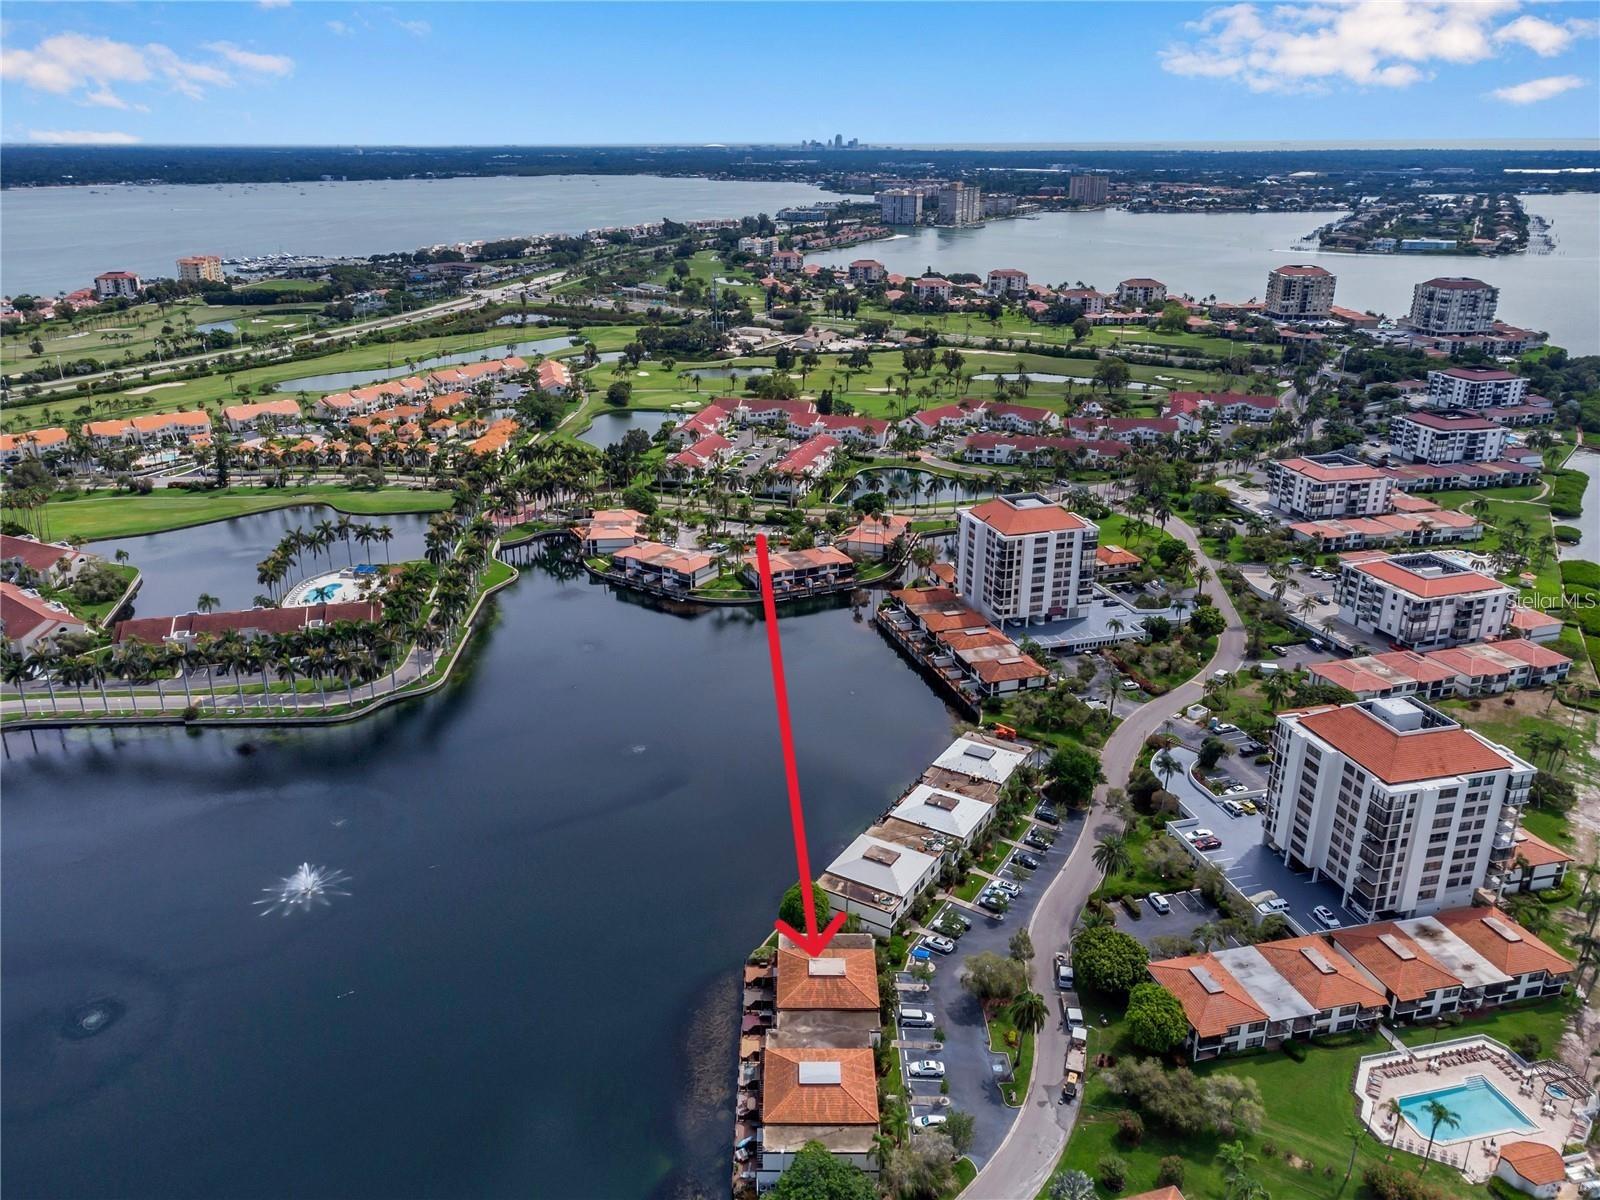 location-location-location, drive only minutes to beaches parks, downtown St Pete!!